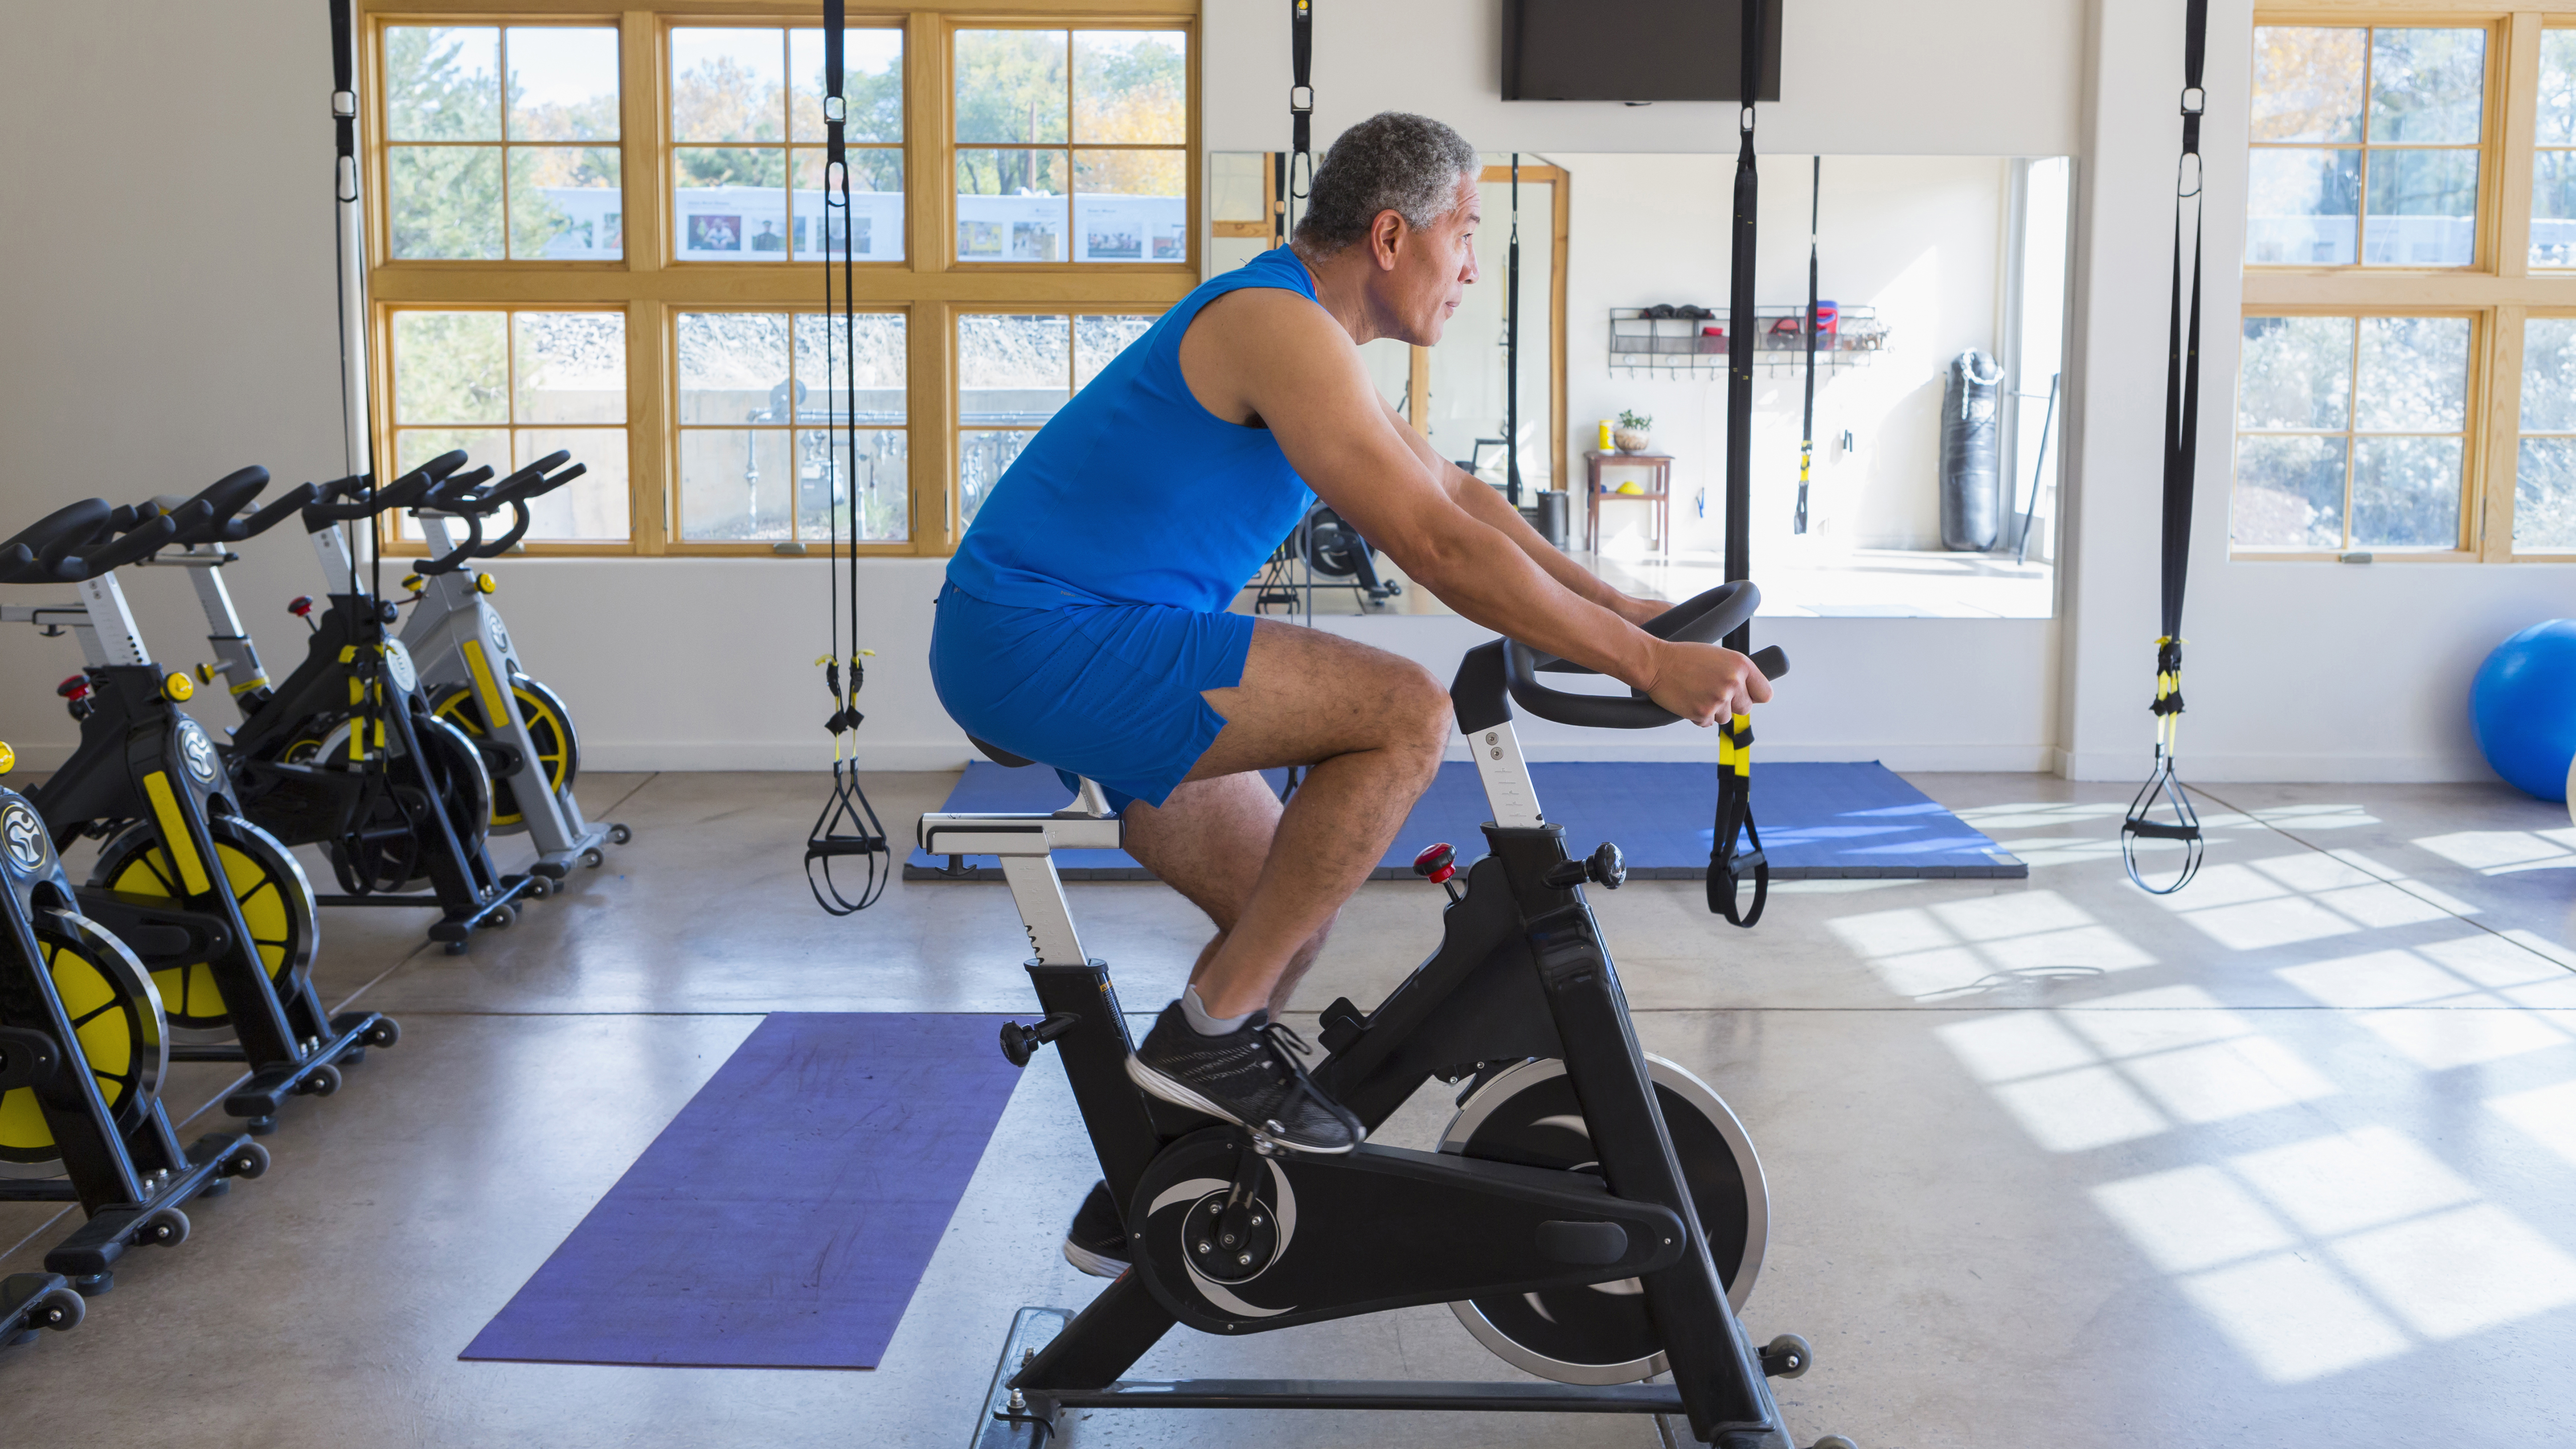 Man works out on stationary bike in gym